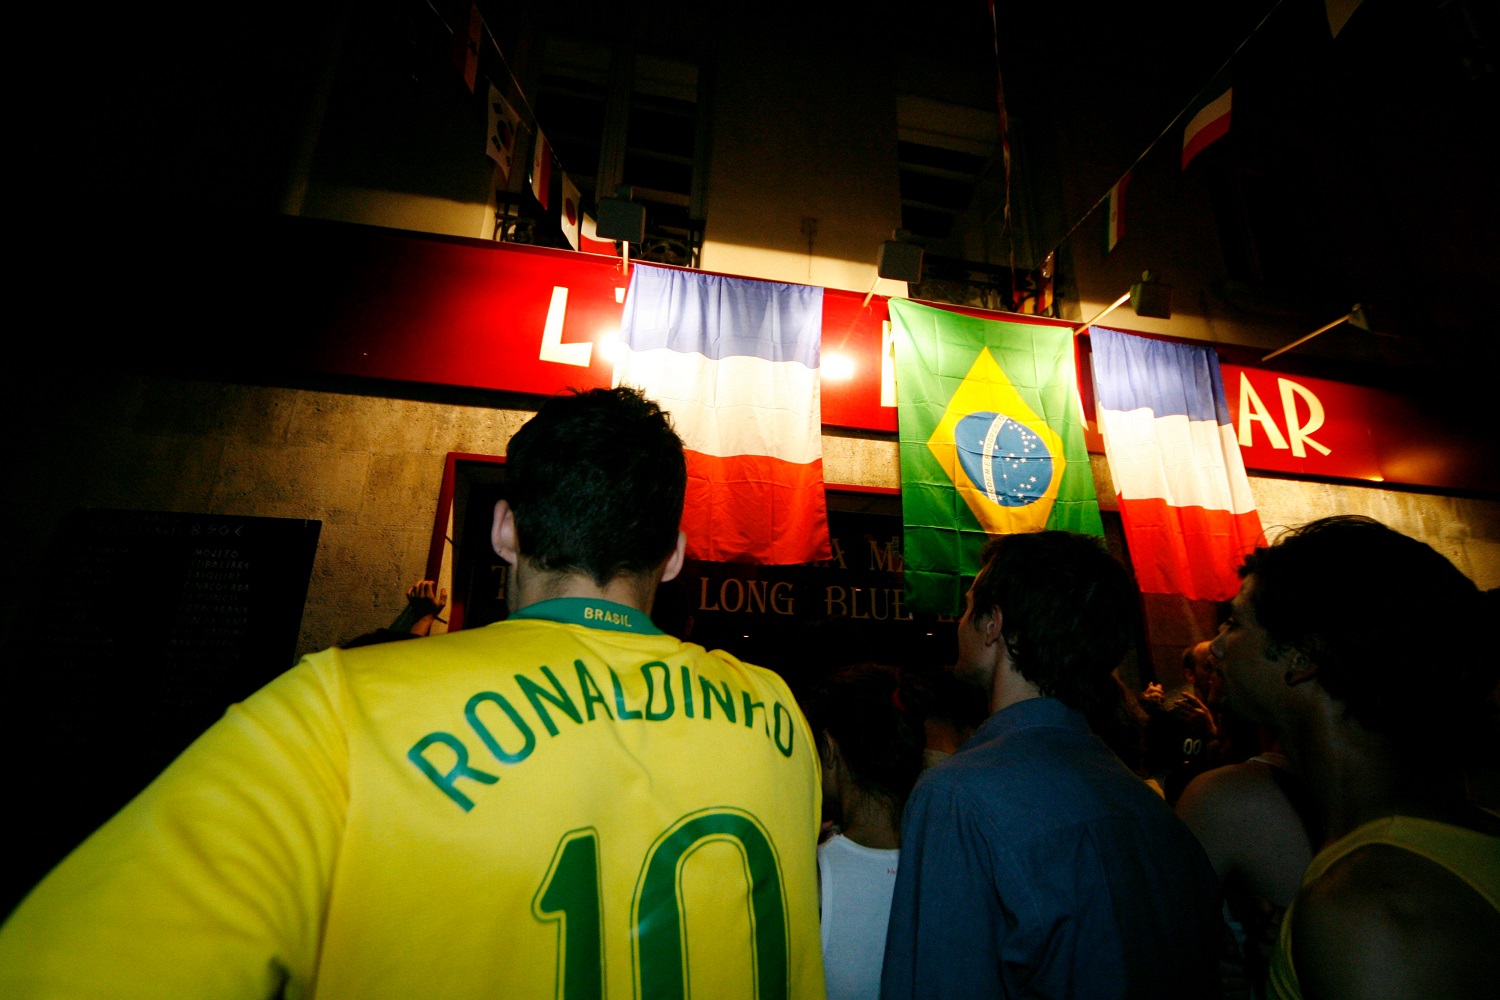 Football (soccer fans) gather to watch a match between Brazil and France. One wears a Brazil national team uniform with the name Ronaldinho and the number 10 on the back.